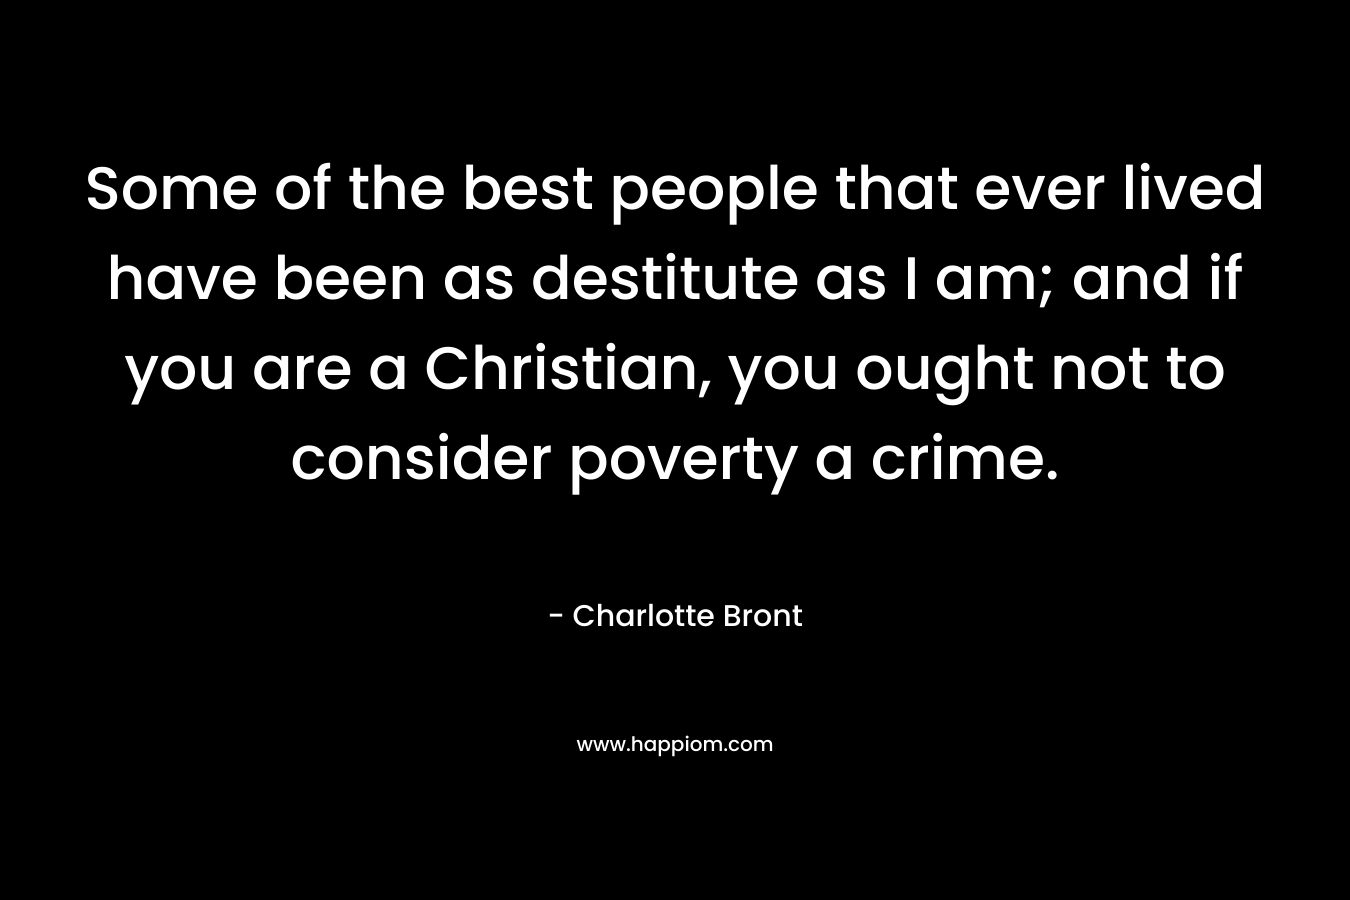 Some of the best people that ever lived have been as destitute as I am; and if you are a Christian, you ought not to consider poverty a crime. – Charlotte Bront